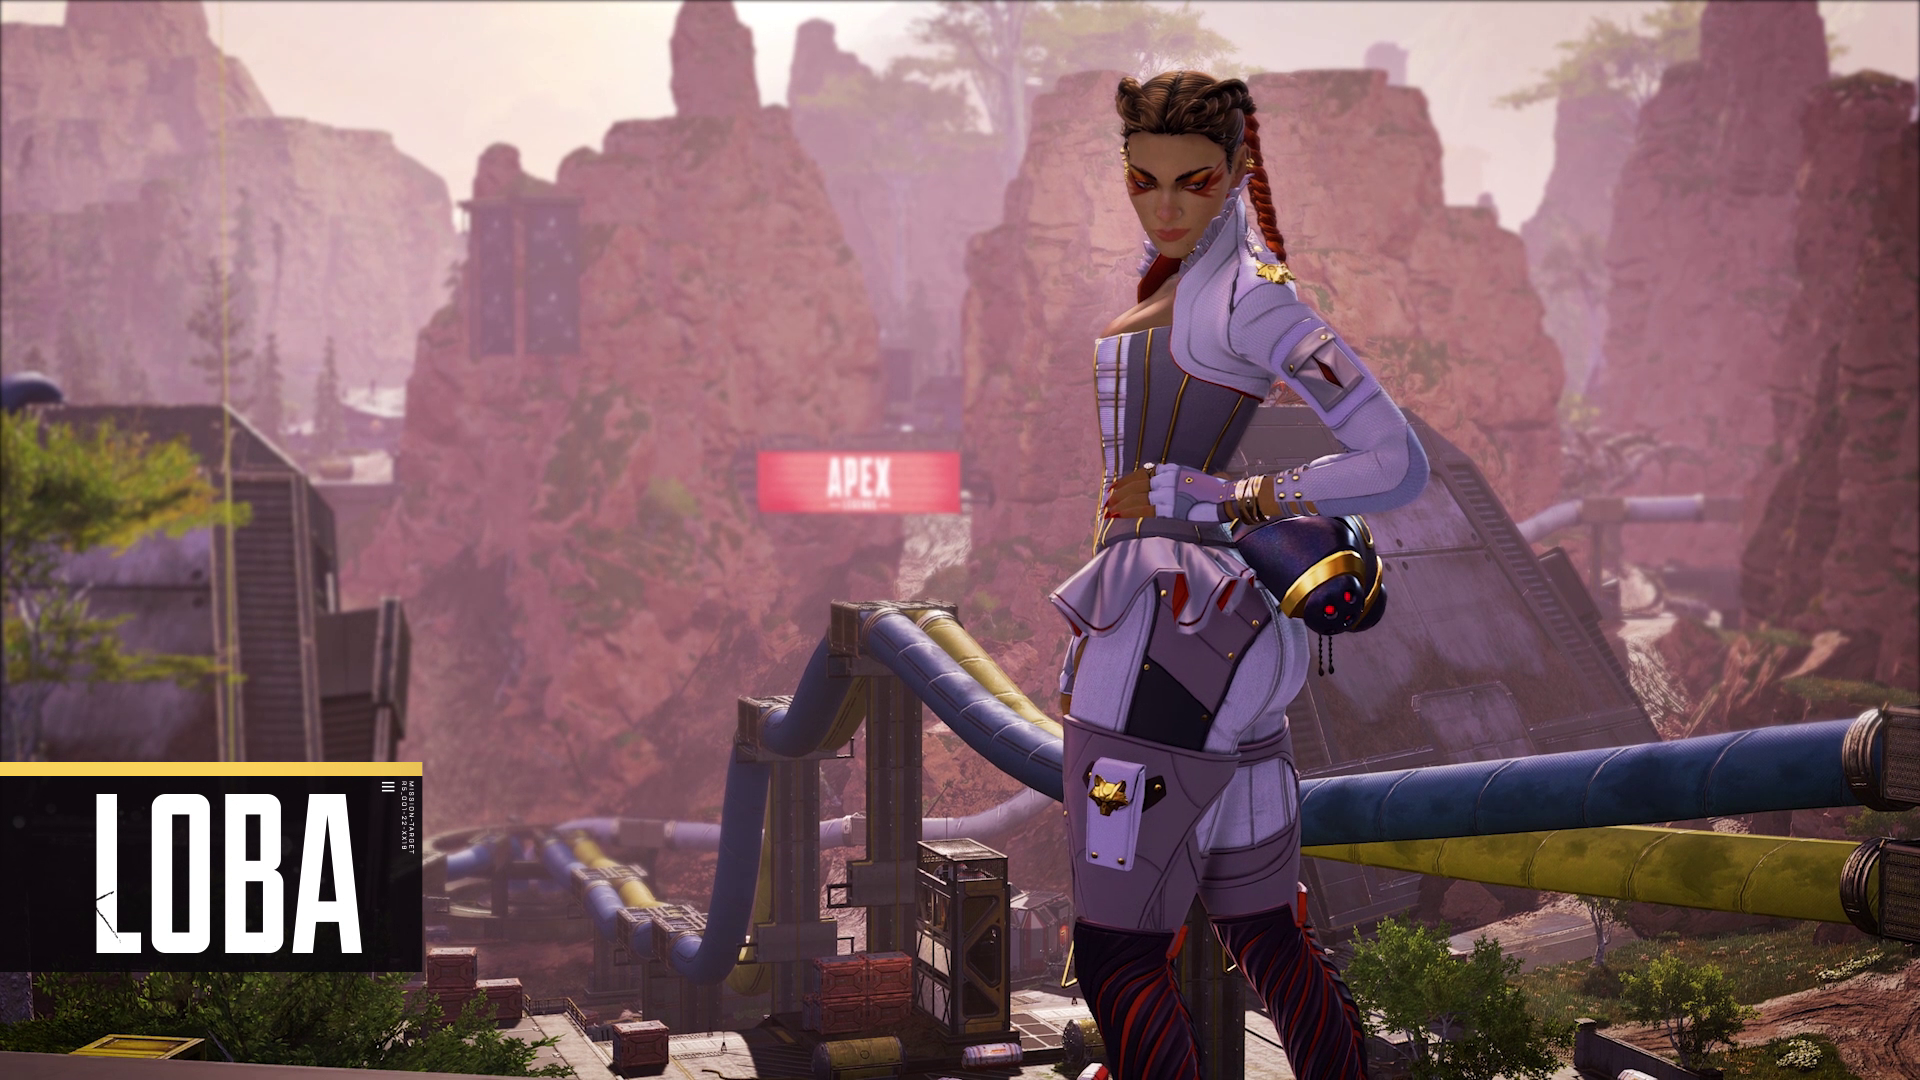 Apex Legends New Season Launches Today with New Content and New